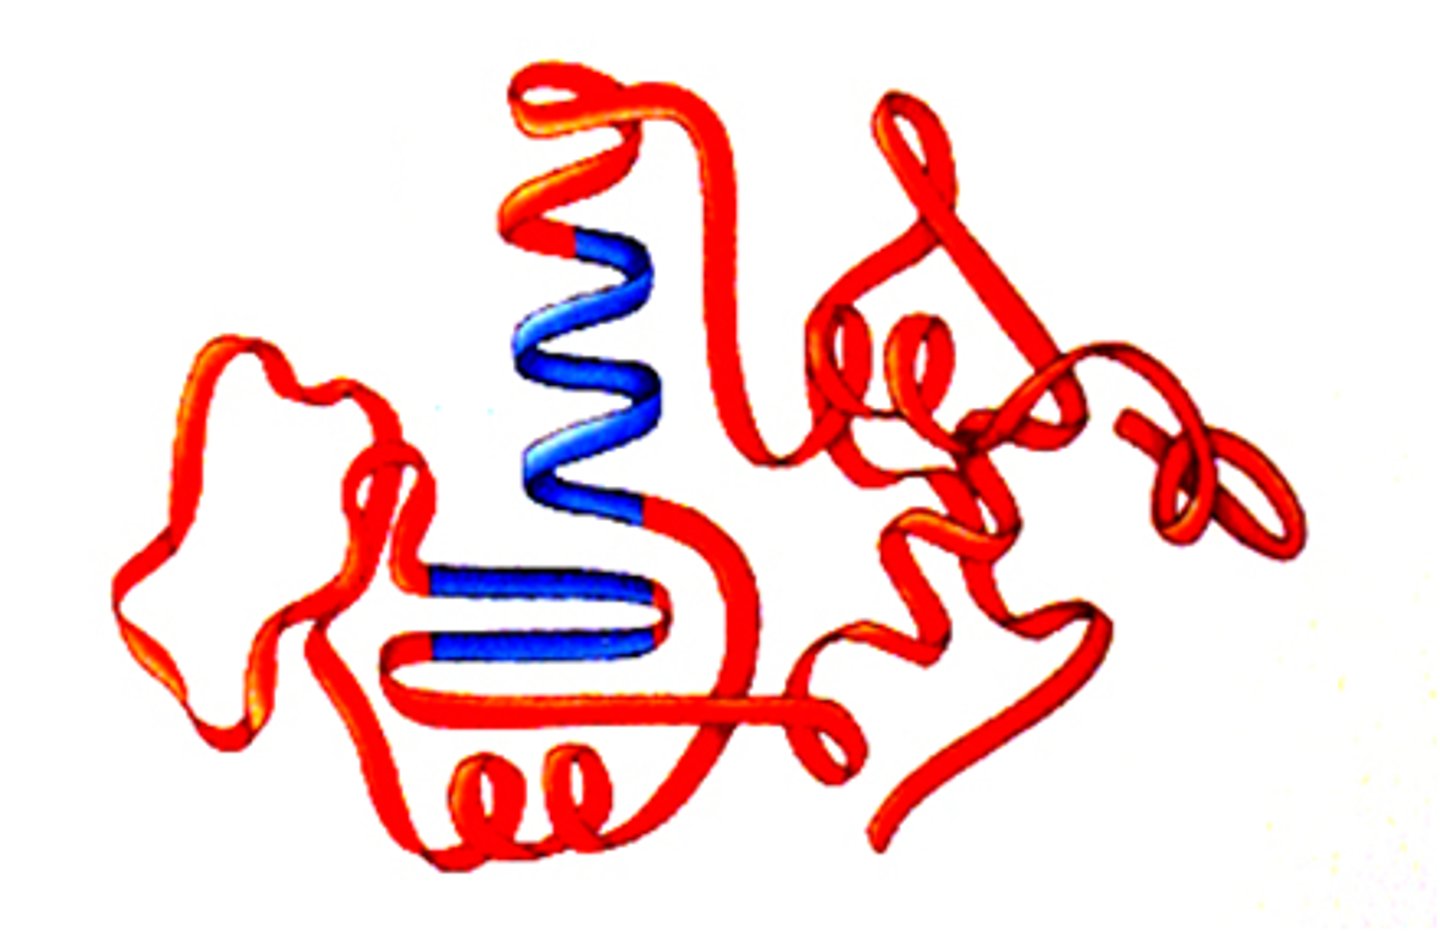 <p>protein structure is formed when the twists and folds of the secondary structure fold again to from a larger 3D structure</p>